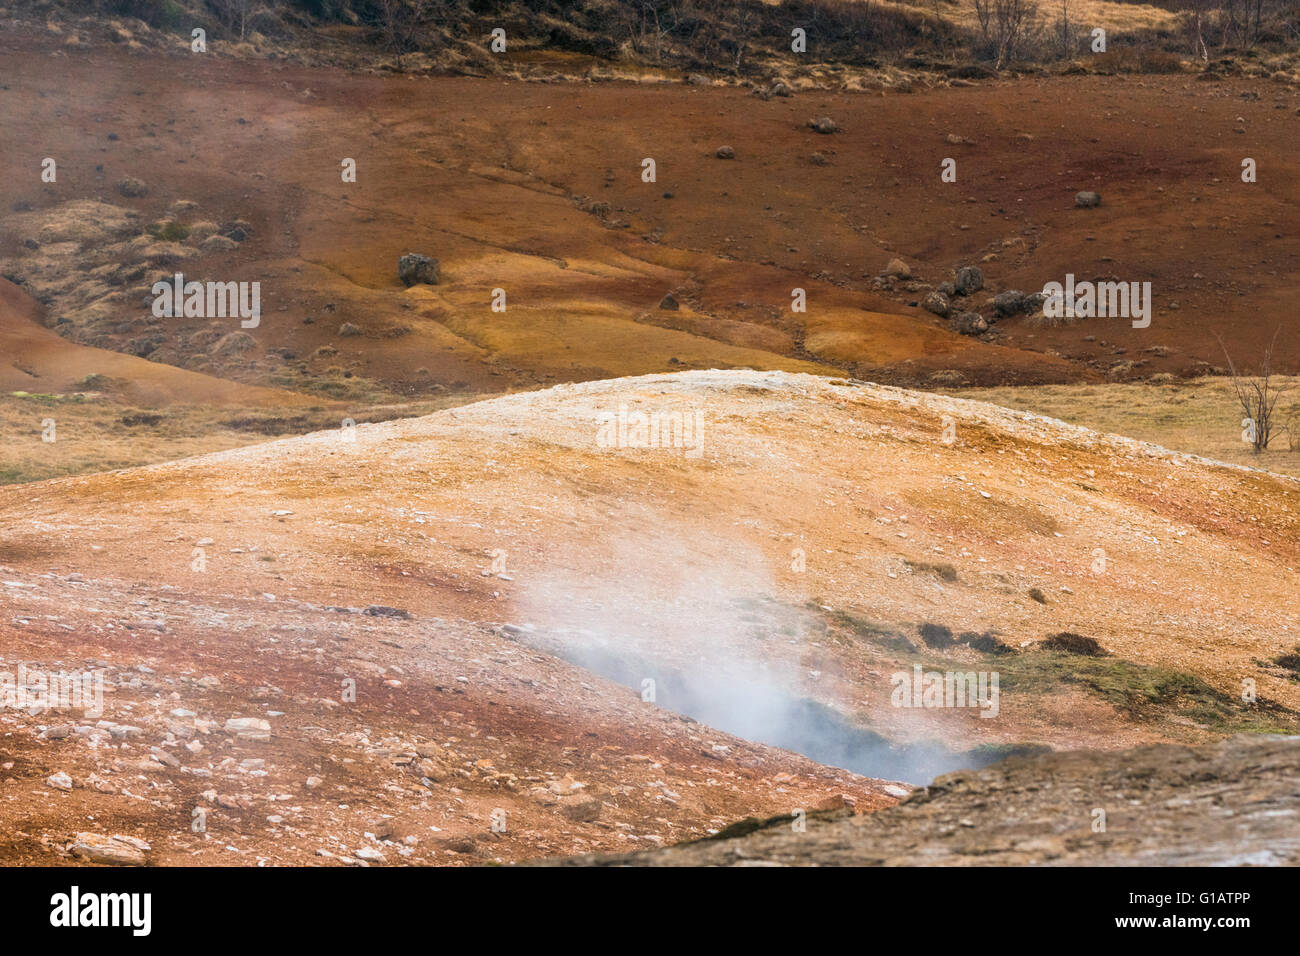 Geothermal activity in icelandic nature with steam coming up from the ground Stock Photo